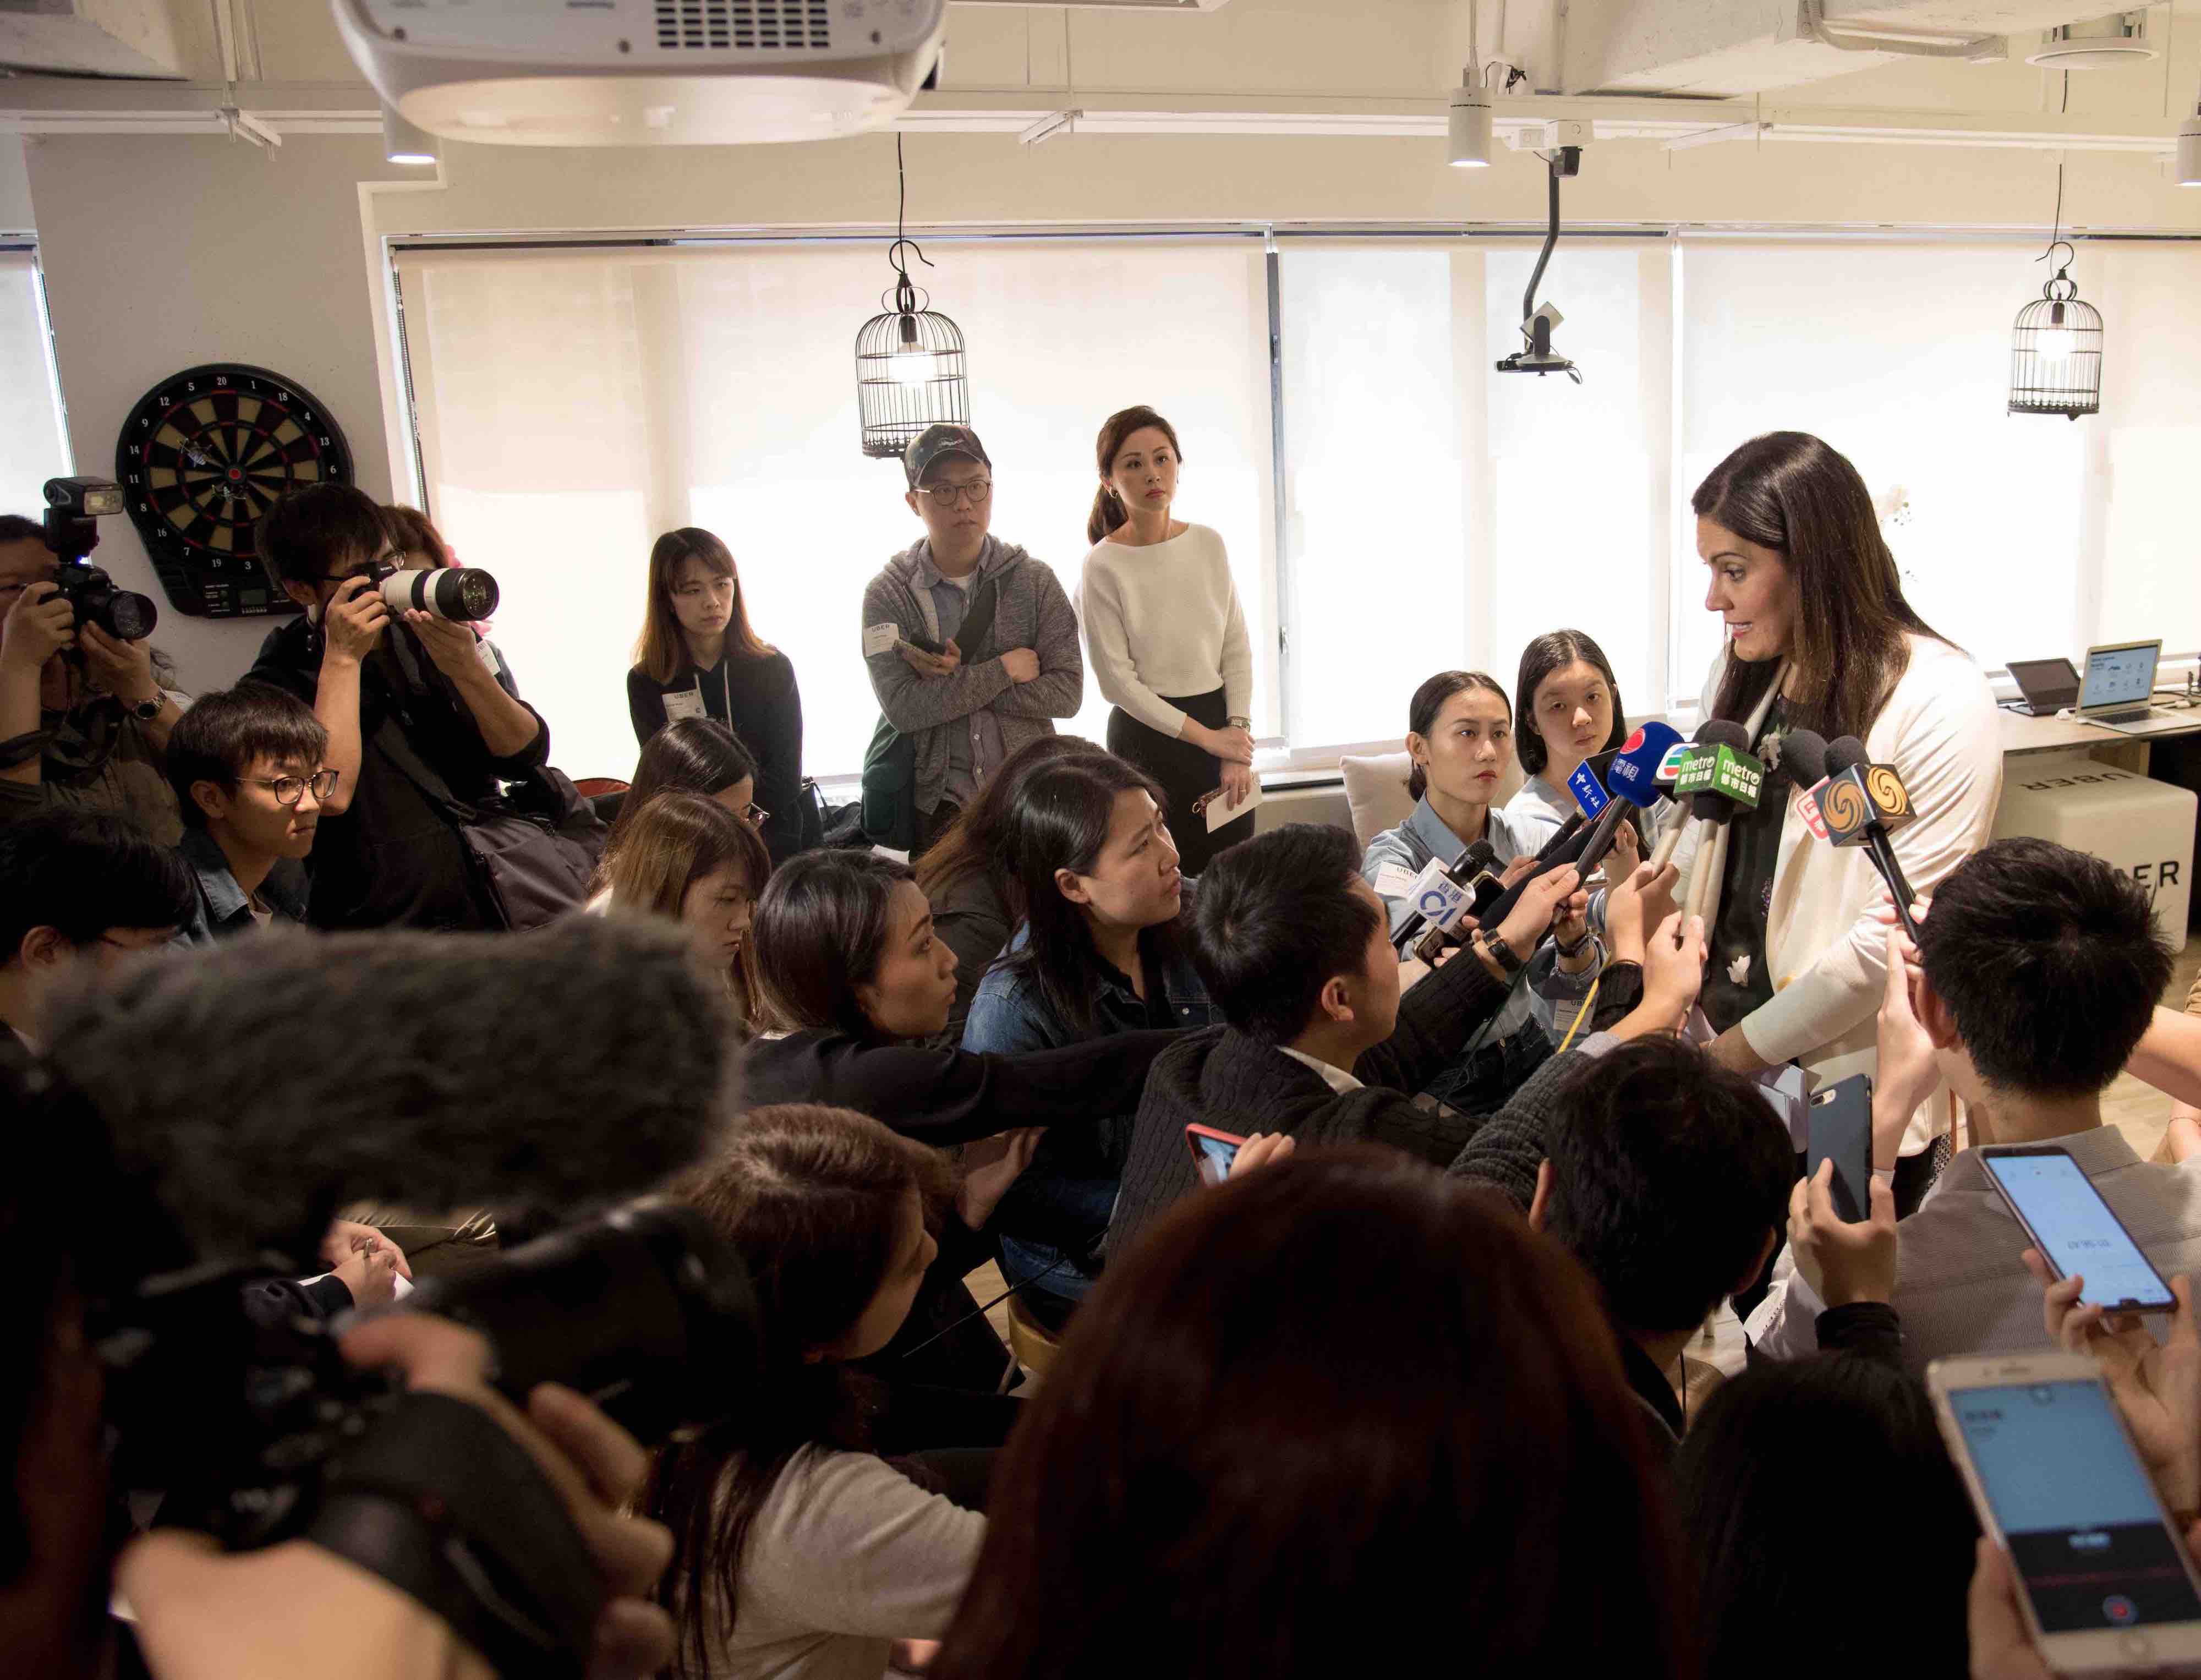 Emilie Potvin, Uber’s head of public policy for North Asia, speaks to the press at the pilot launch of Uber Flash in Hong Kong today. Photo via Uber.